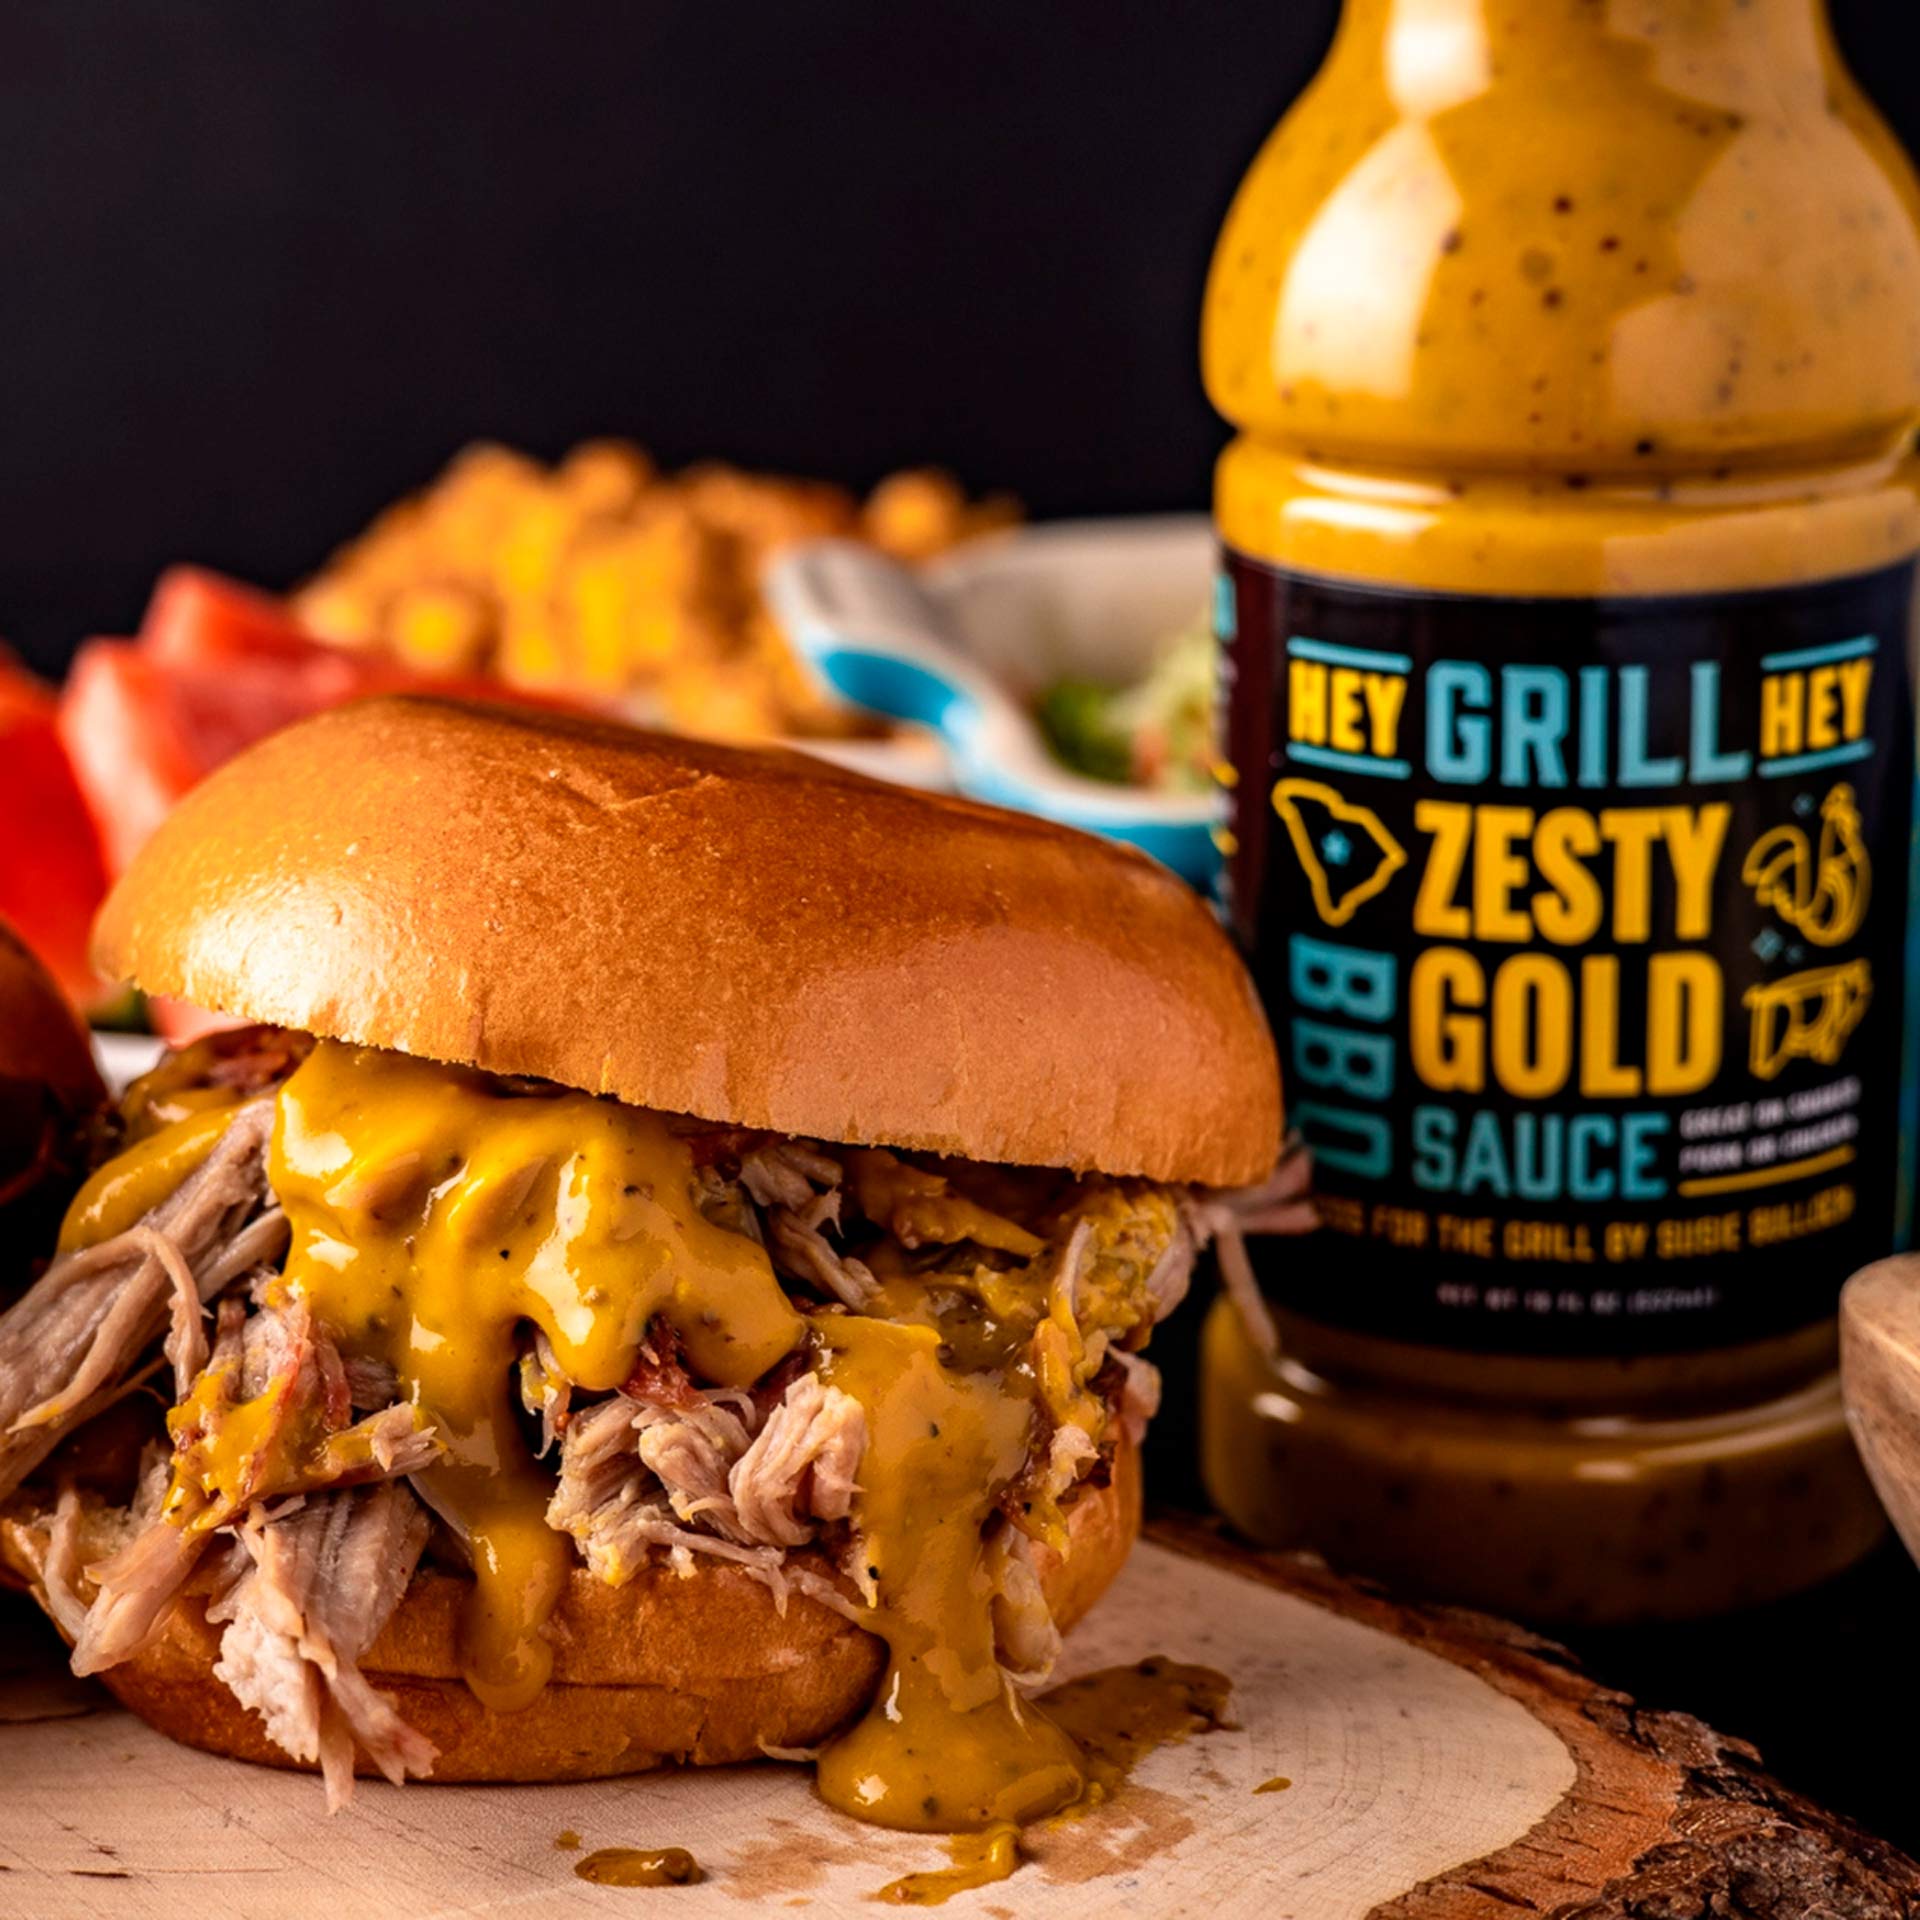 Hey Grill Hey Zesty Gold BBQ Sauce Condiments & Sauces 12042859